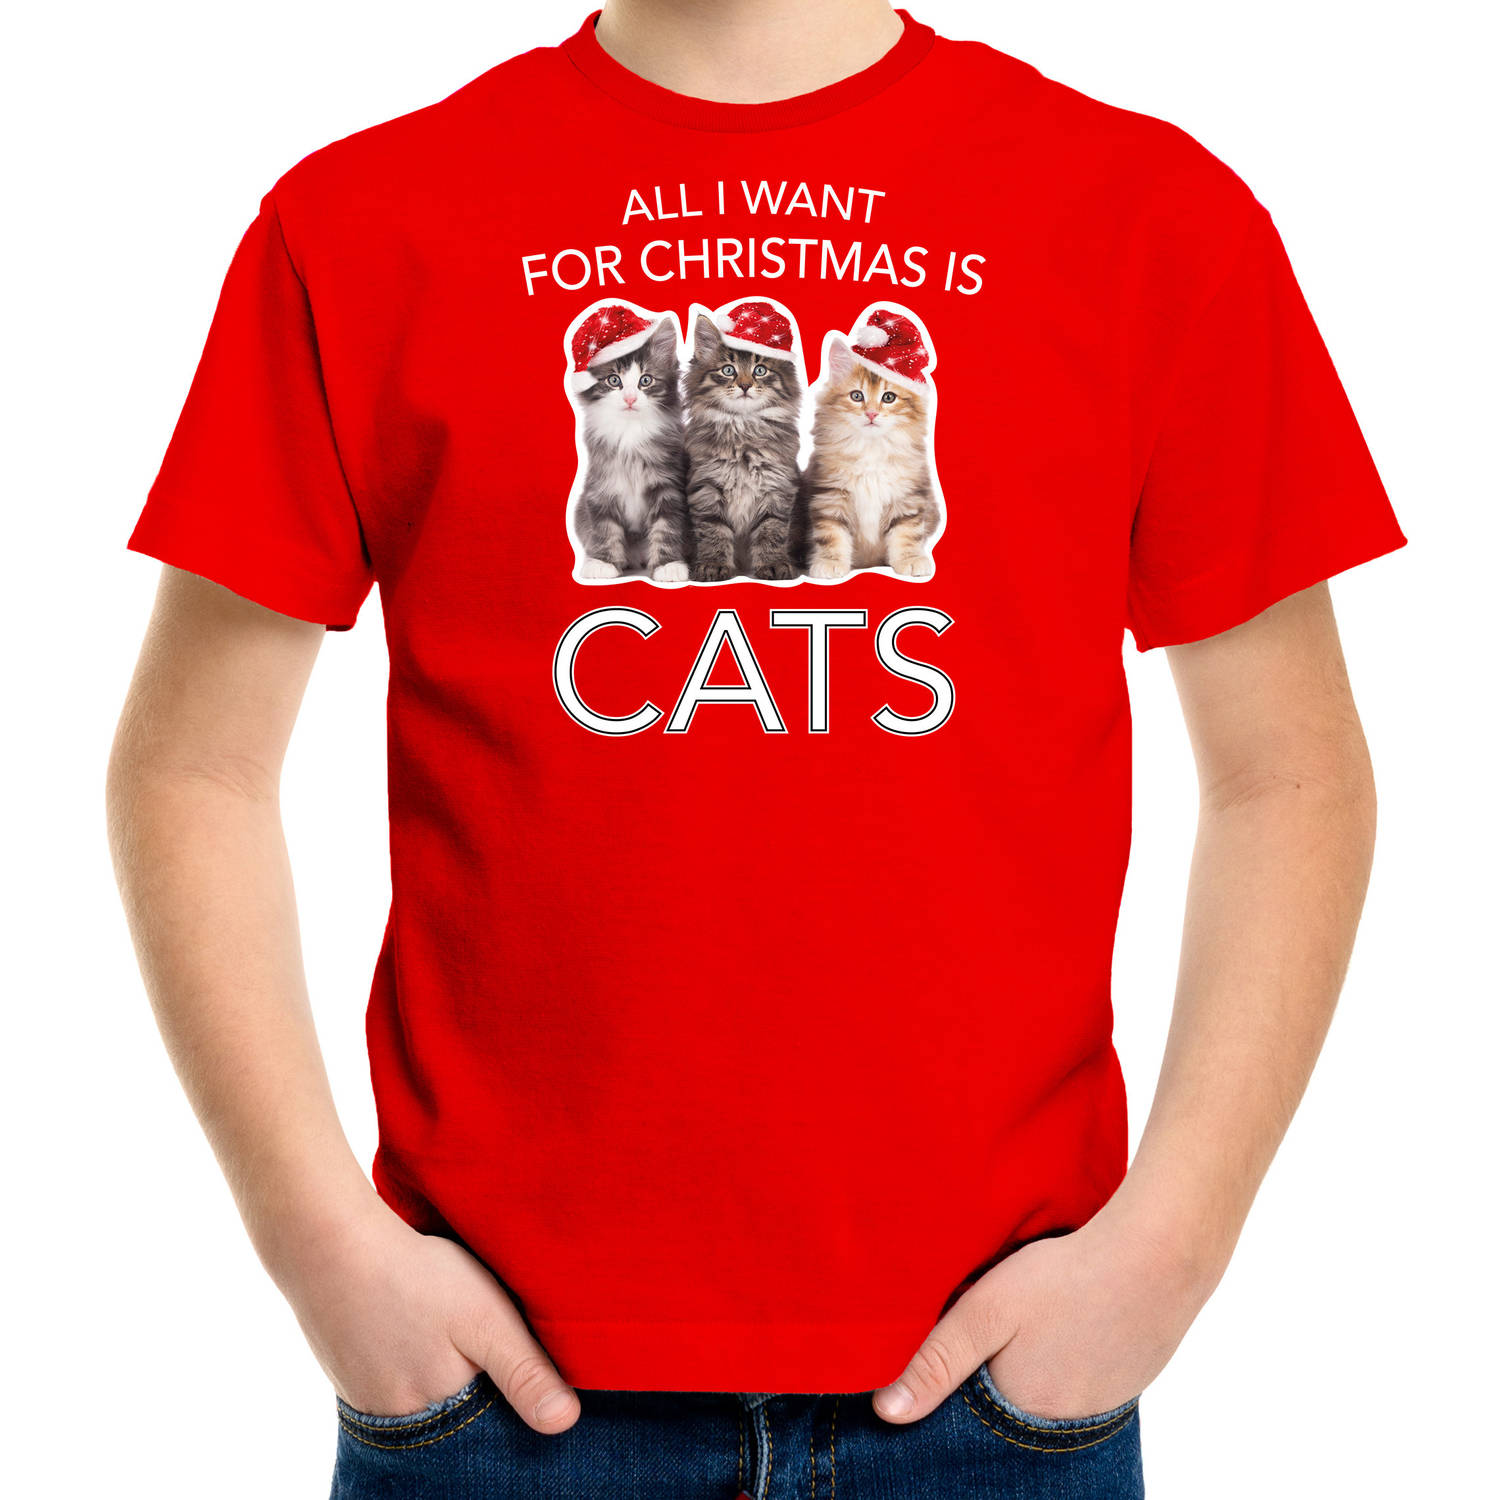 Rood Kerst shirt/ Kerstkleding All i want for Christmas is cats voor kinderen XL (164-176) - kerst t-shirts kind